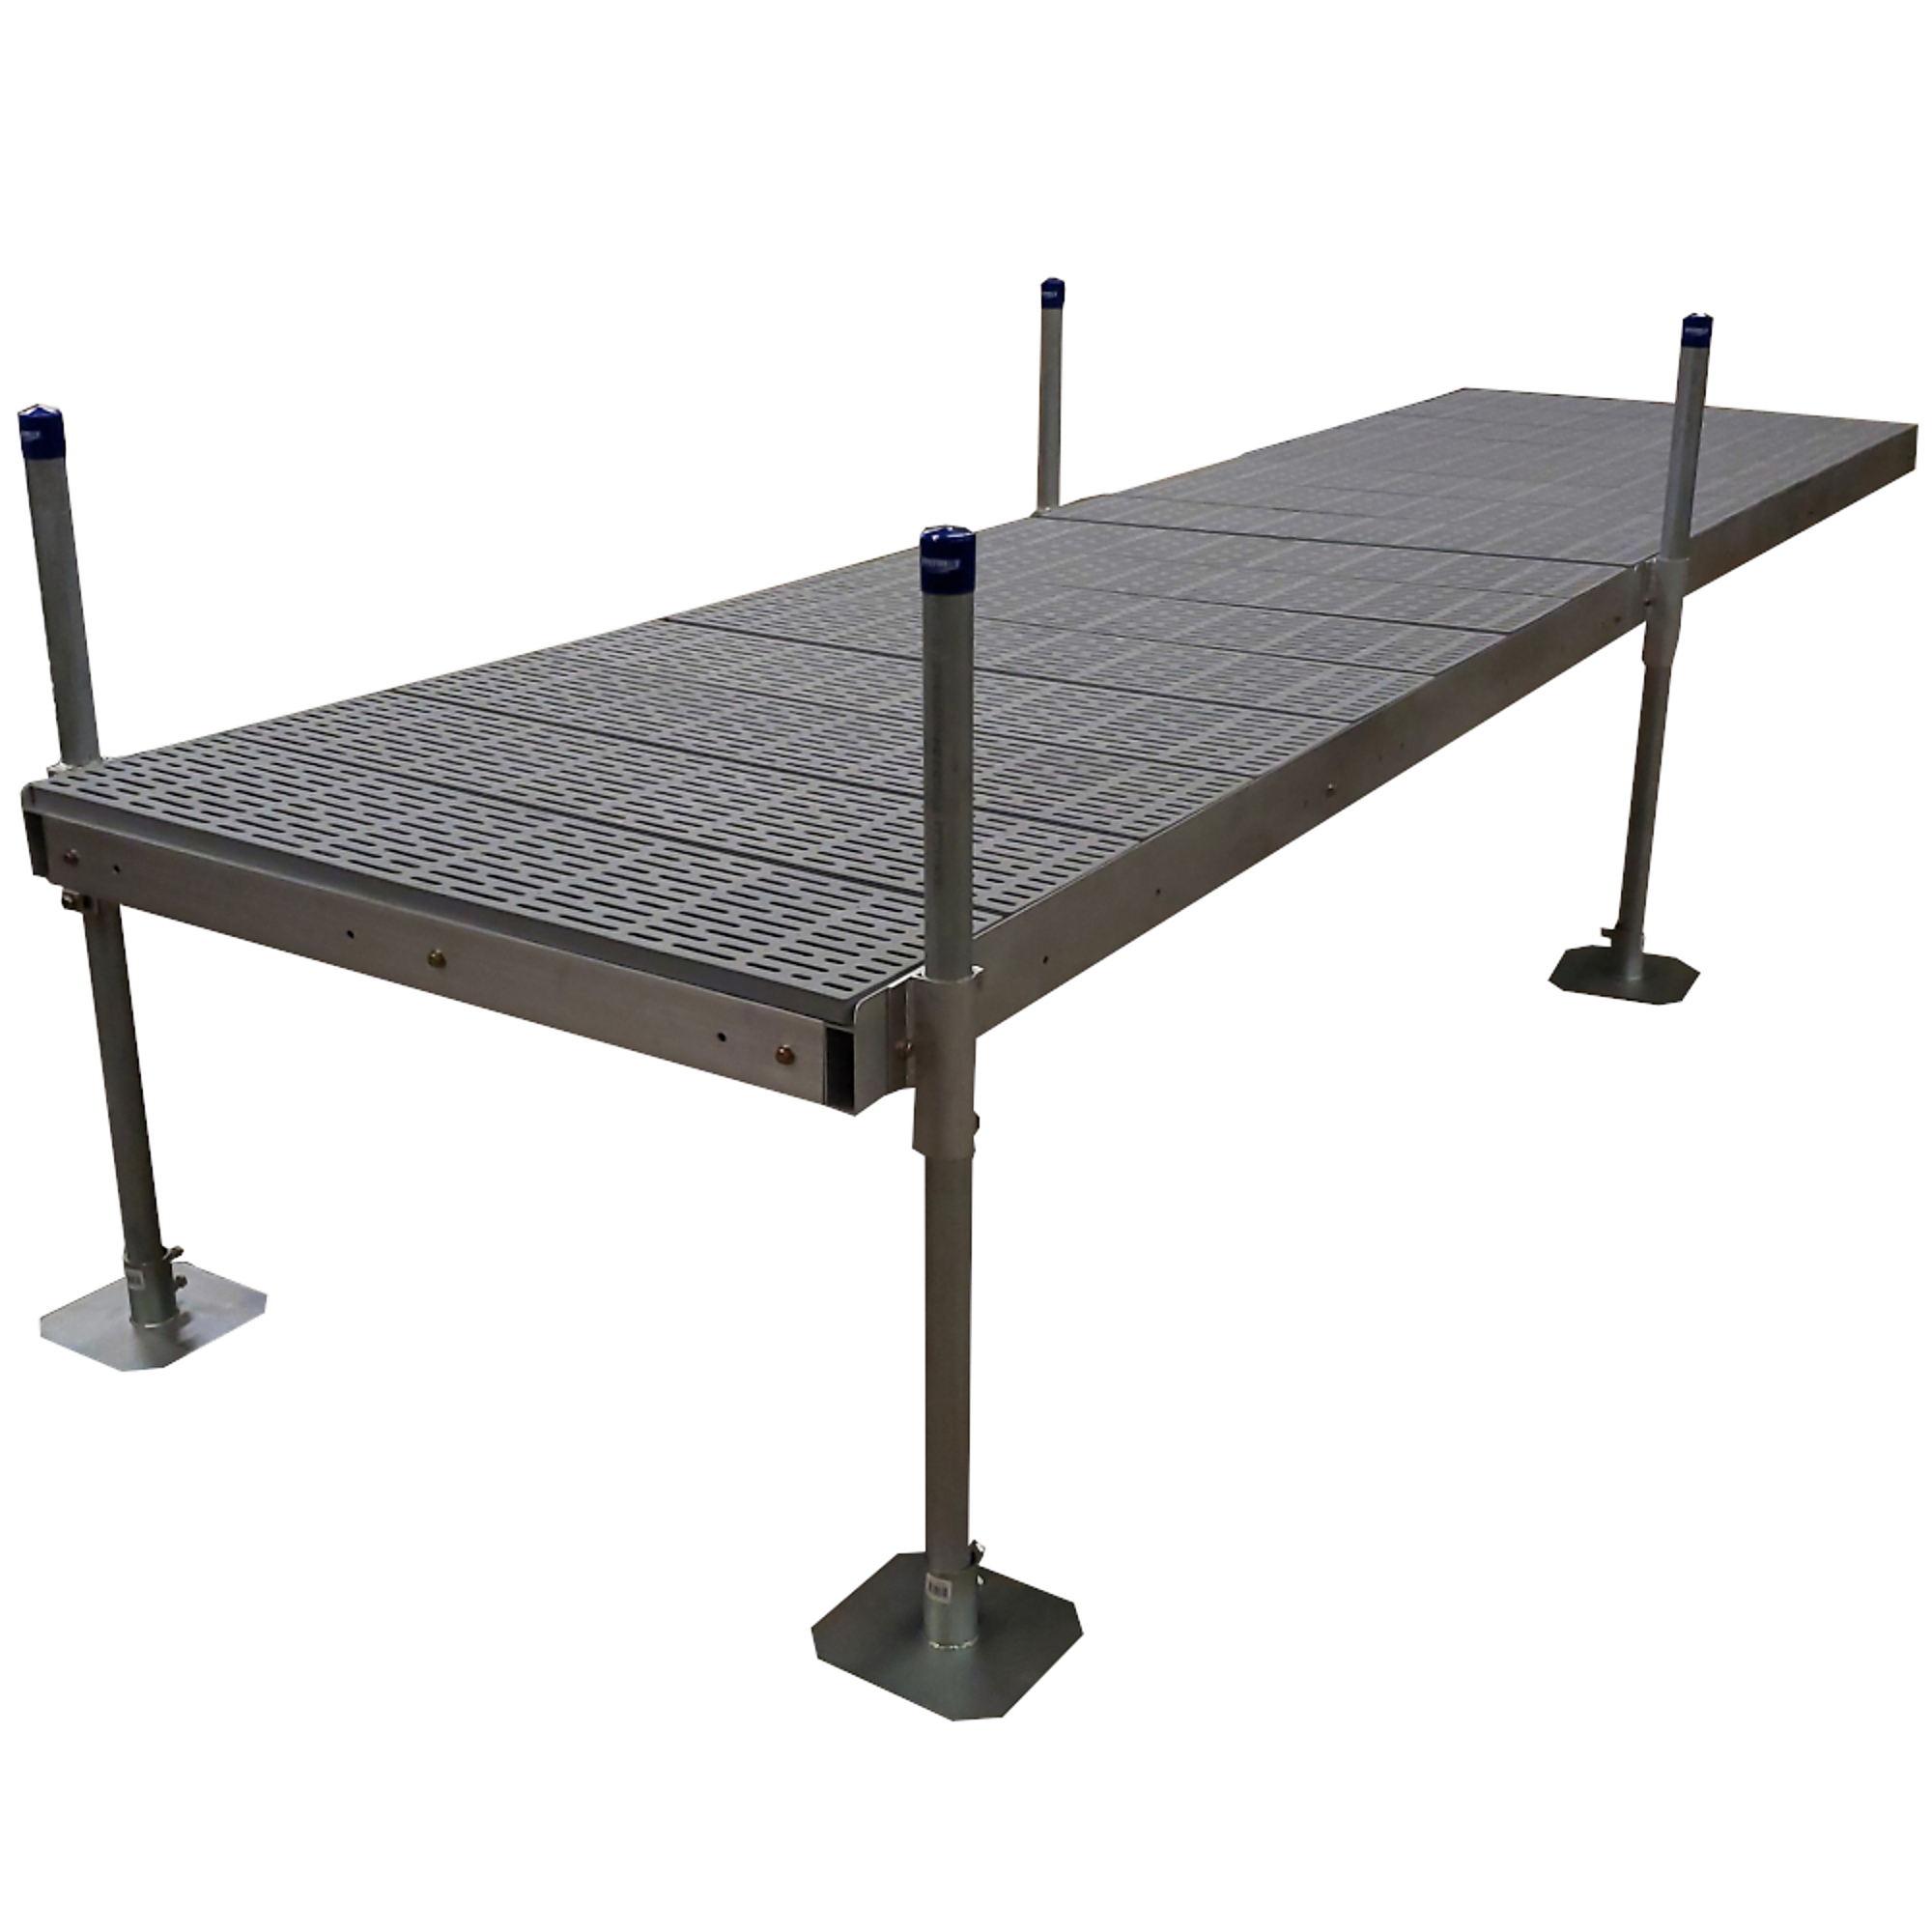 Patriot Docks, Low Profile Stationary Dock, Poly Decking-4ft. Pipe, Product Type Dock, Length 96 in, Width 48 in, Model 10504